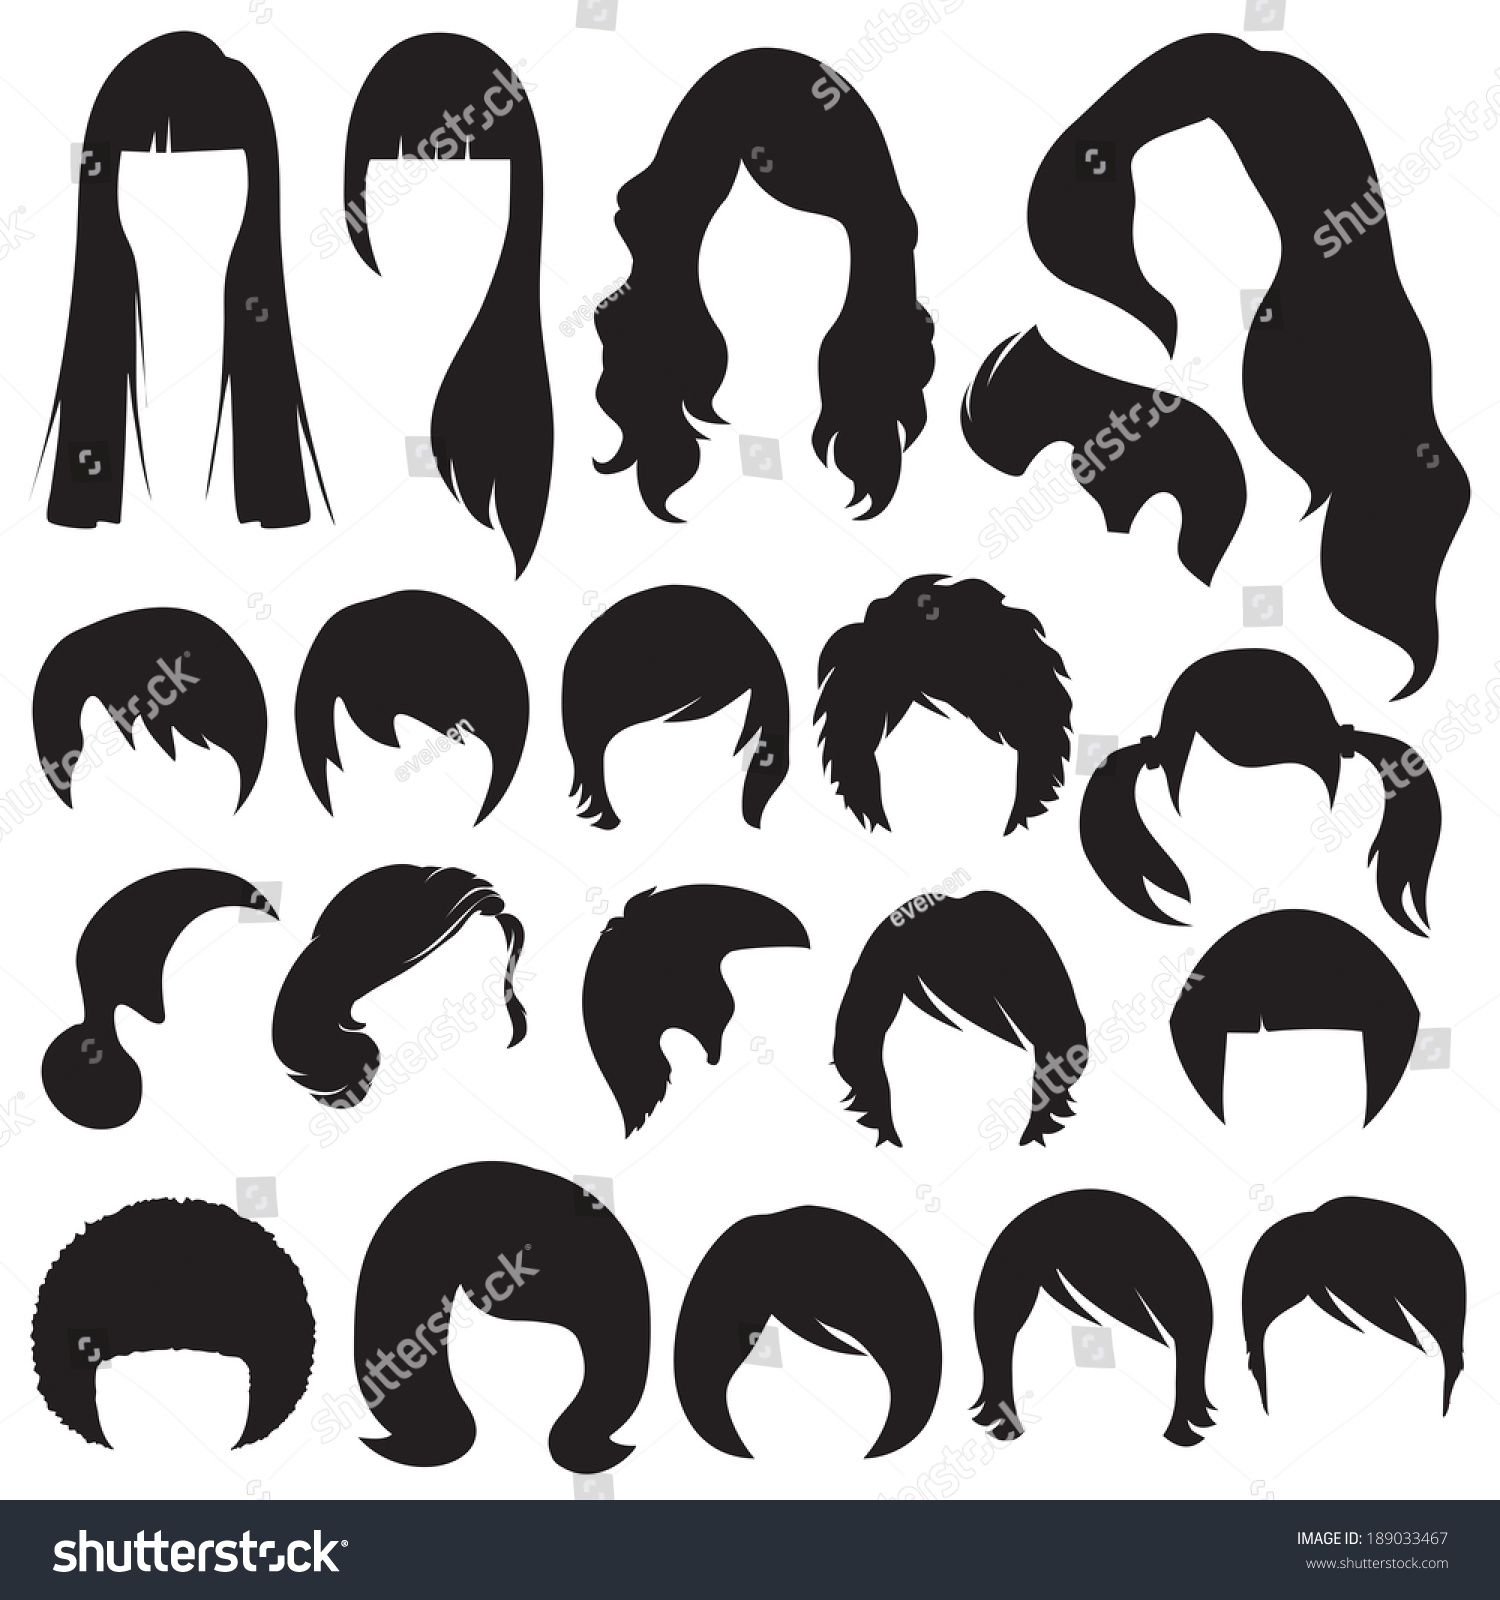 Hair Silhouettes Woman Man Hairstyle Stock Vector 189033467 - Shutterstock